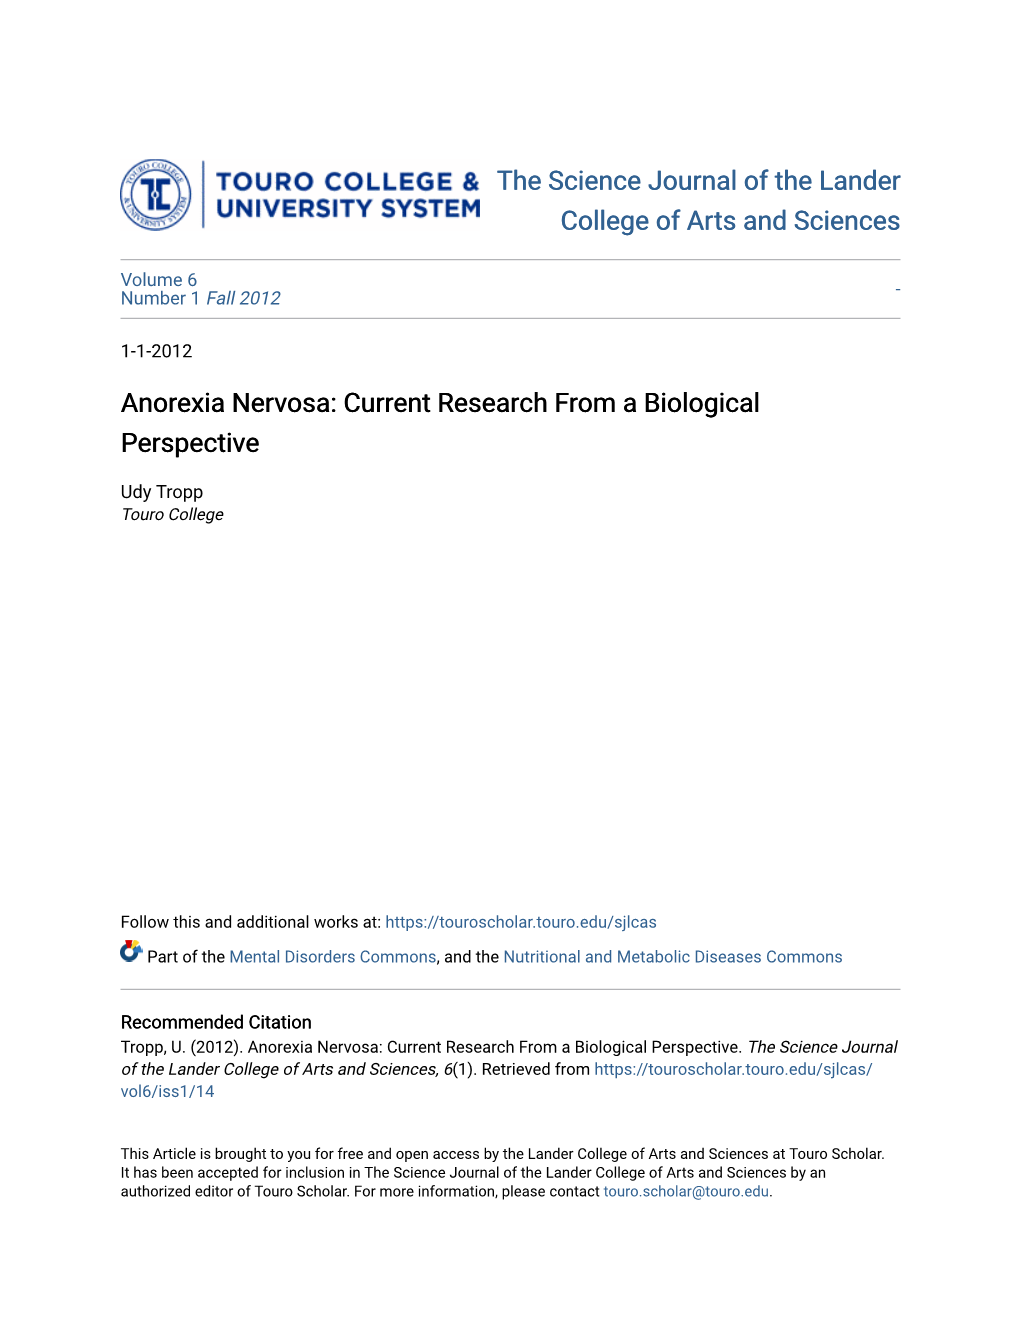 Anorexia Nervosa: Current Research from a Biological Perspective